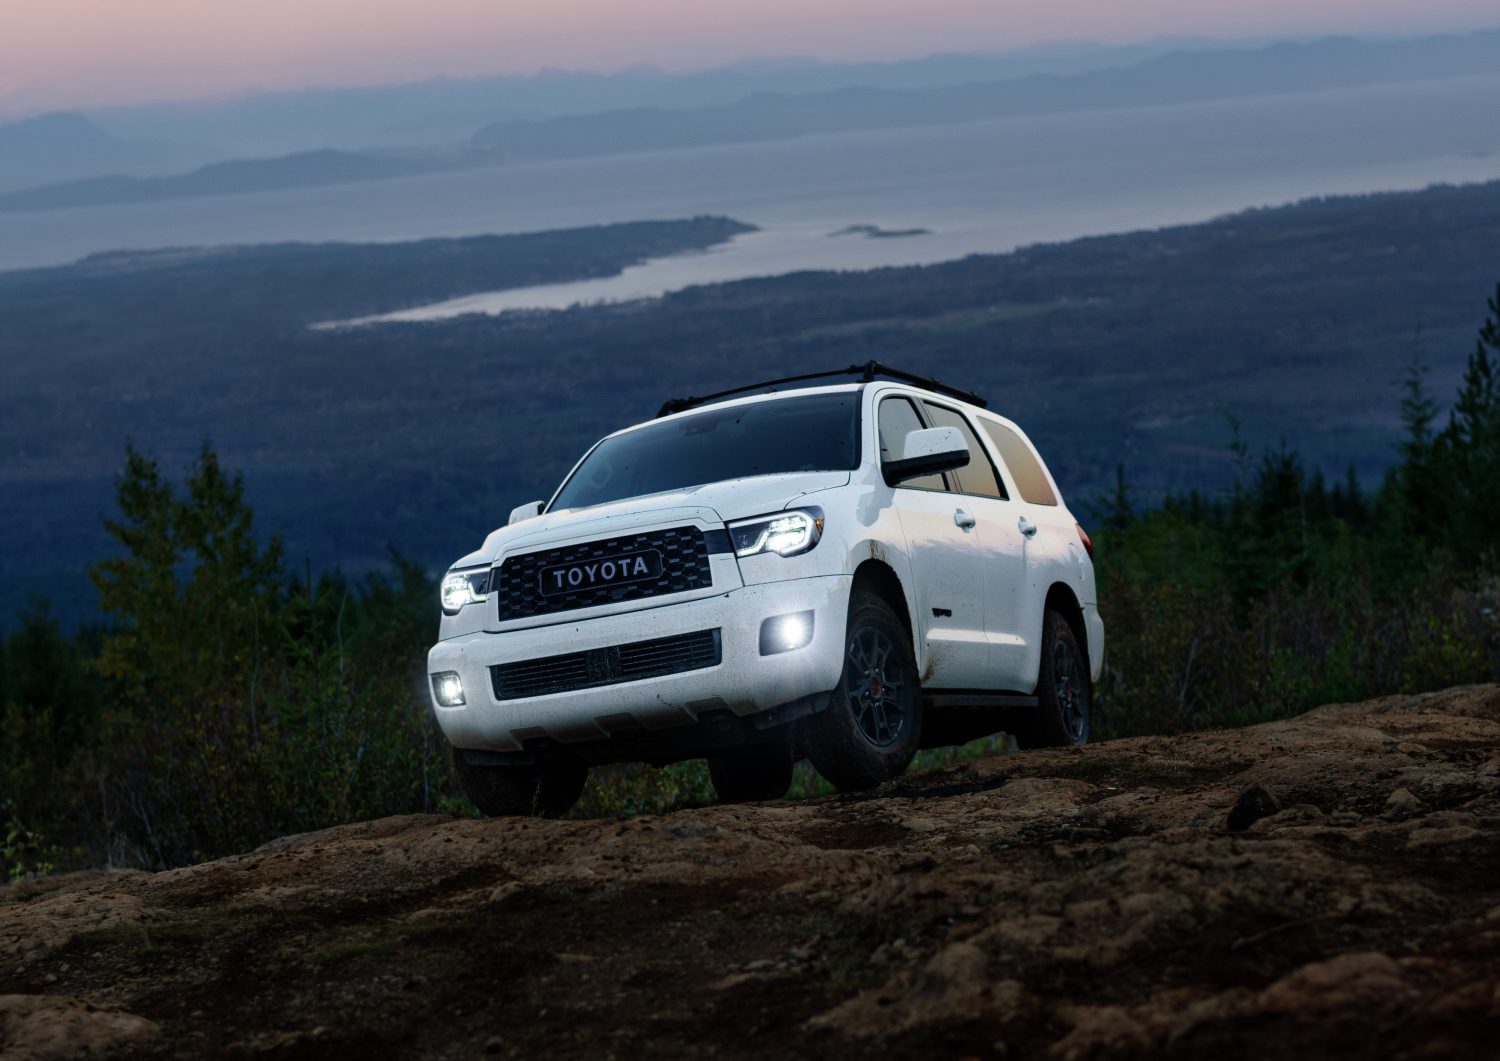 2020 Sequoia Family Trips get More Adventurous with New TRD Pro - Toyota  USA Newsroom